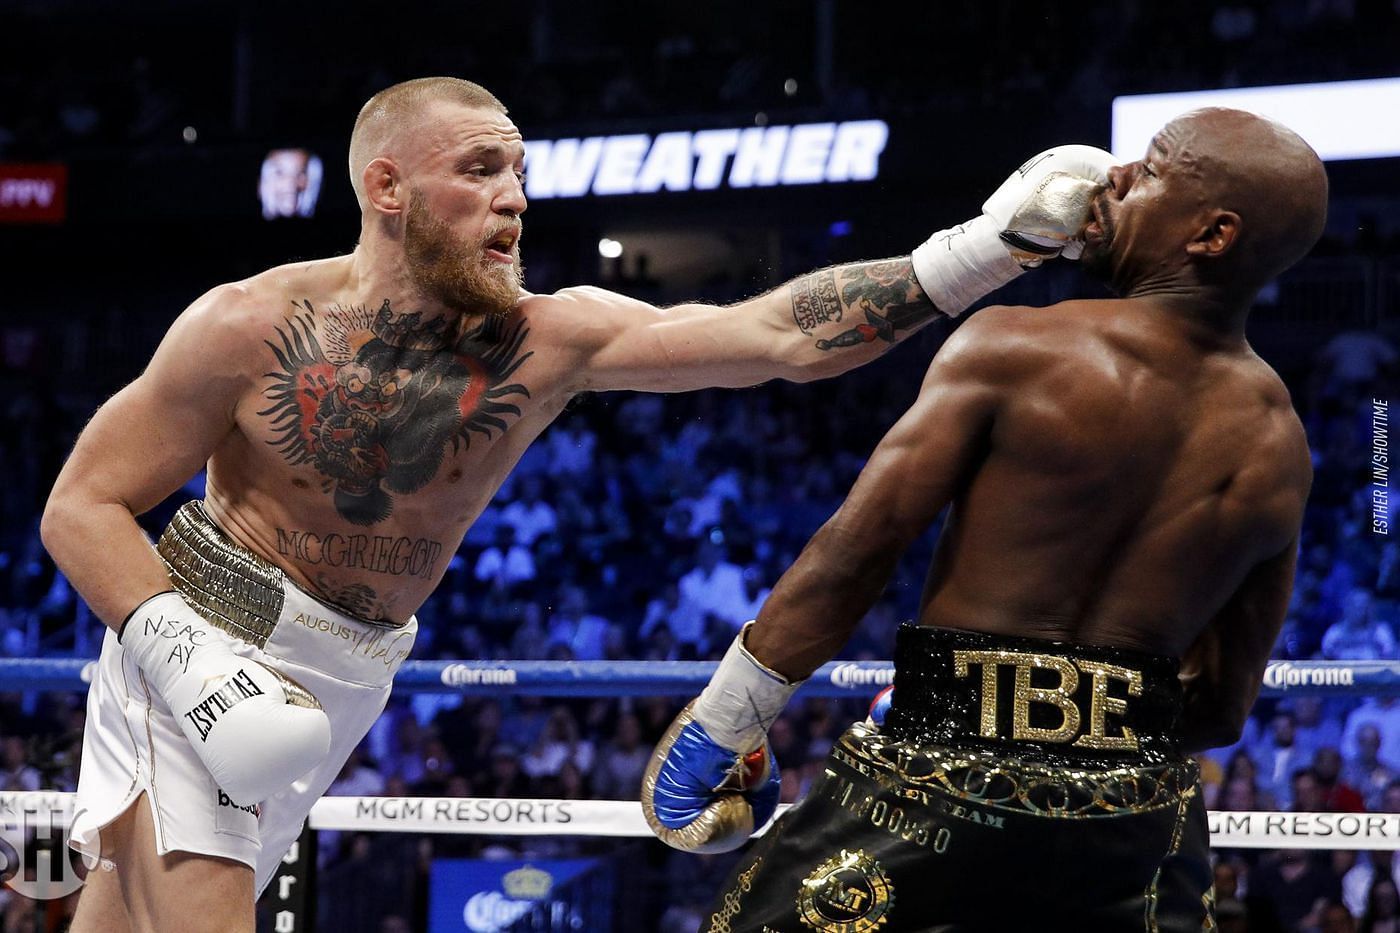 Ever since his clash with Floyd Mayweather, Conor McGregor has relied heavily on his boxing game in the UFC